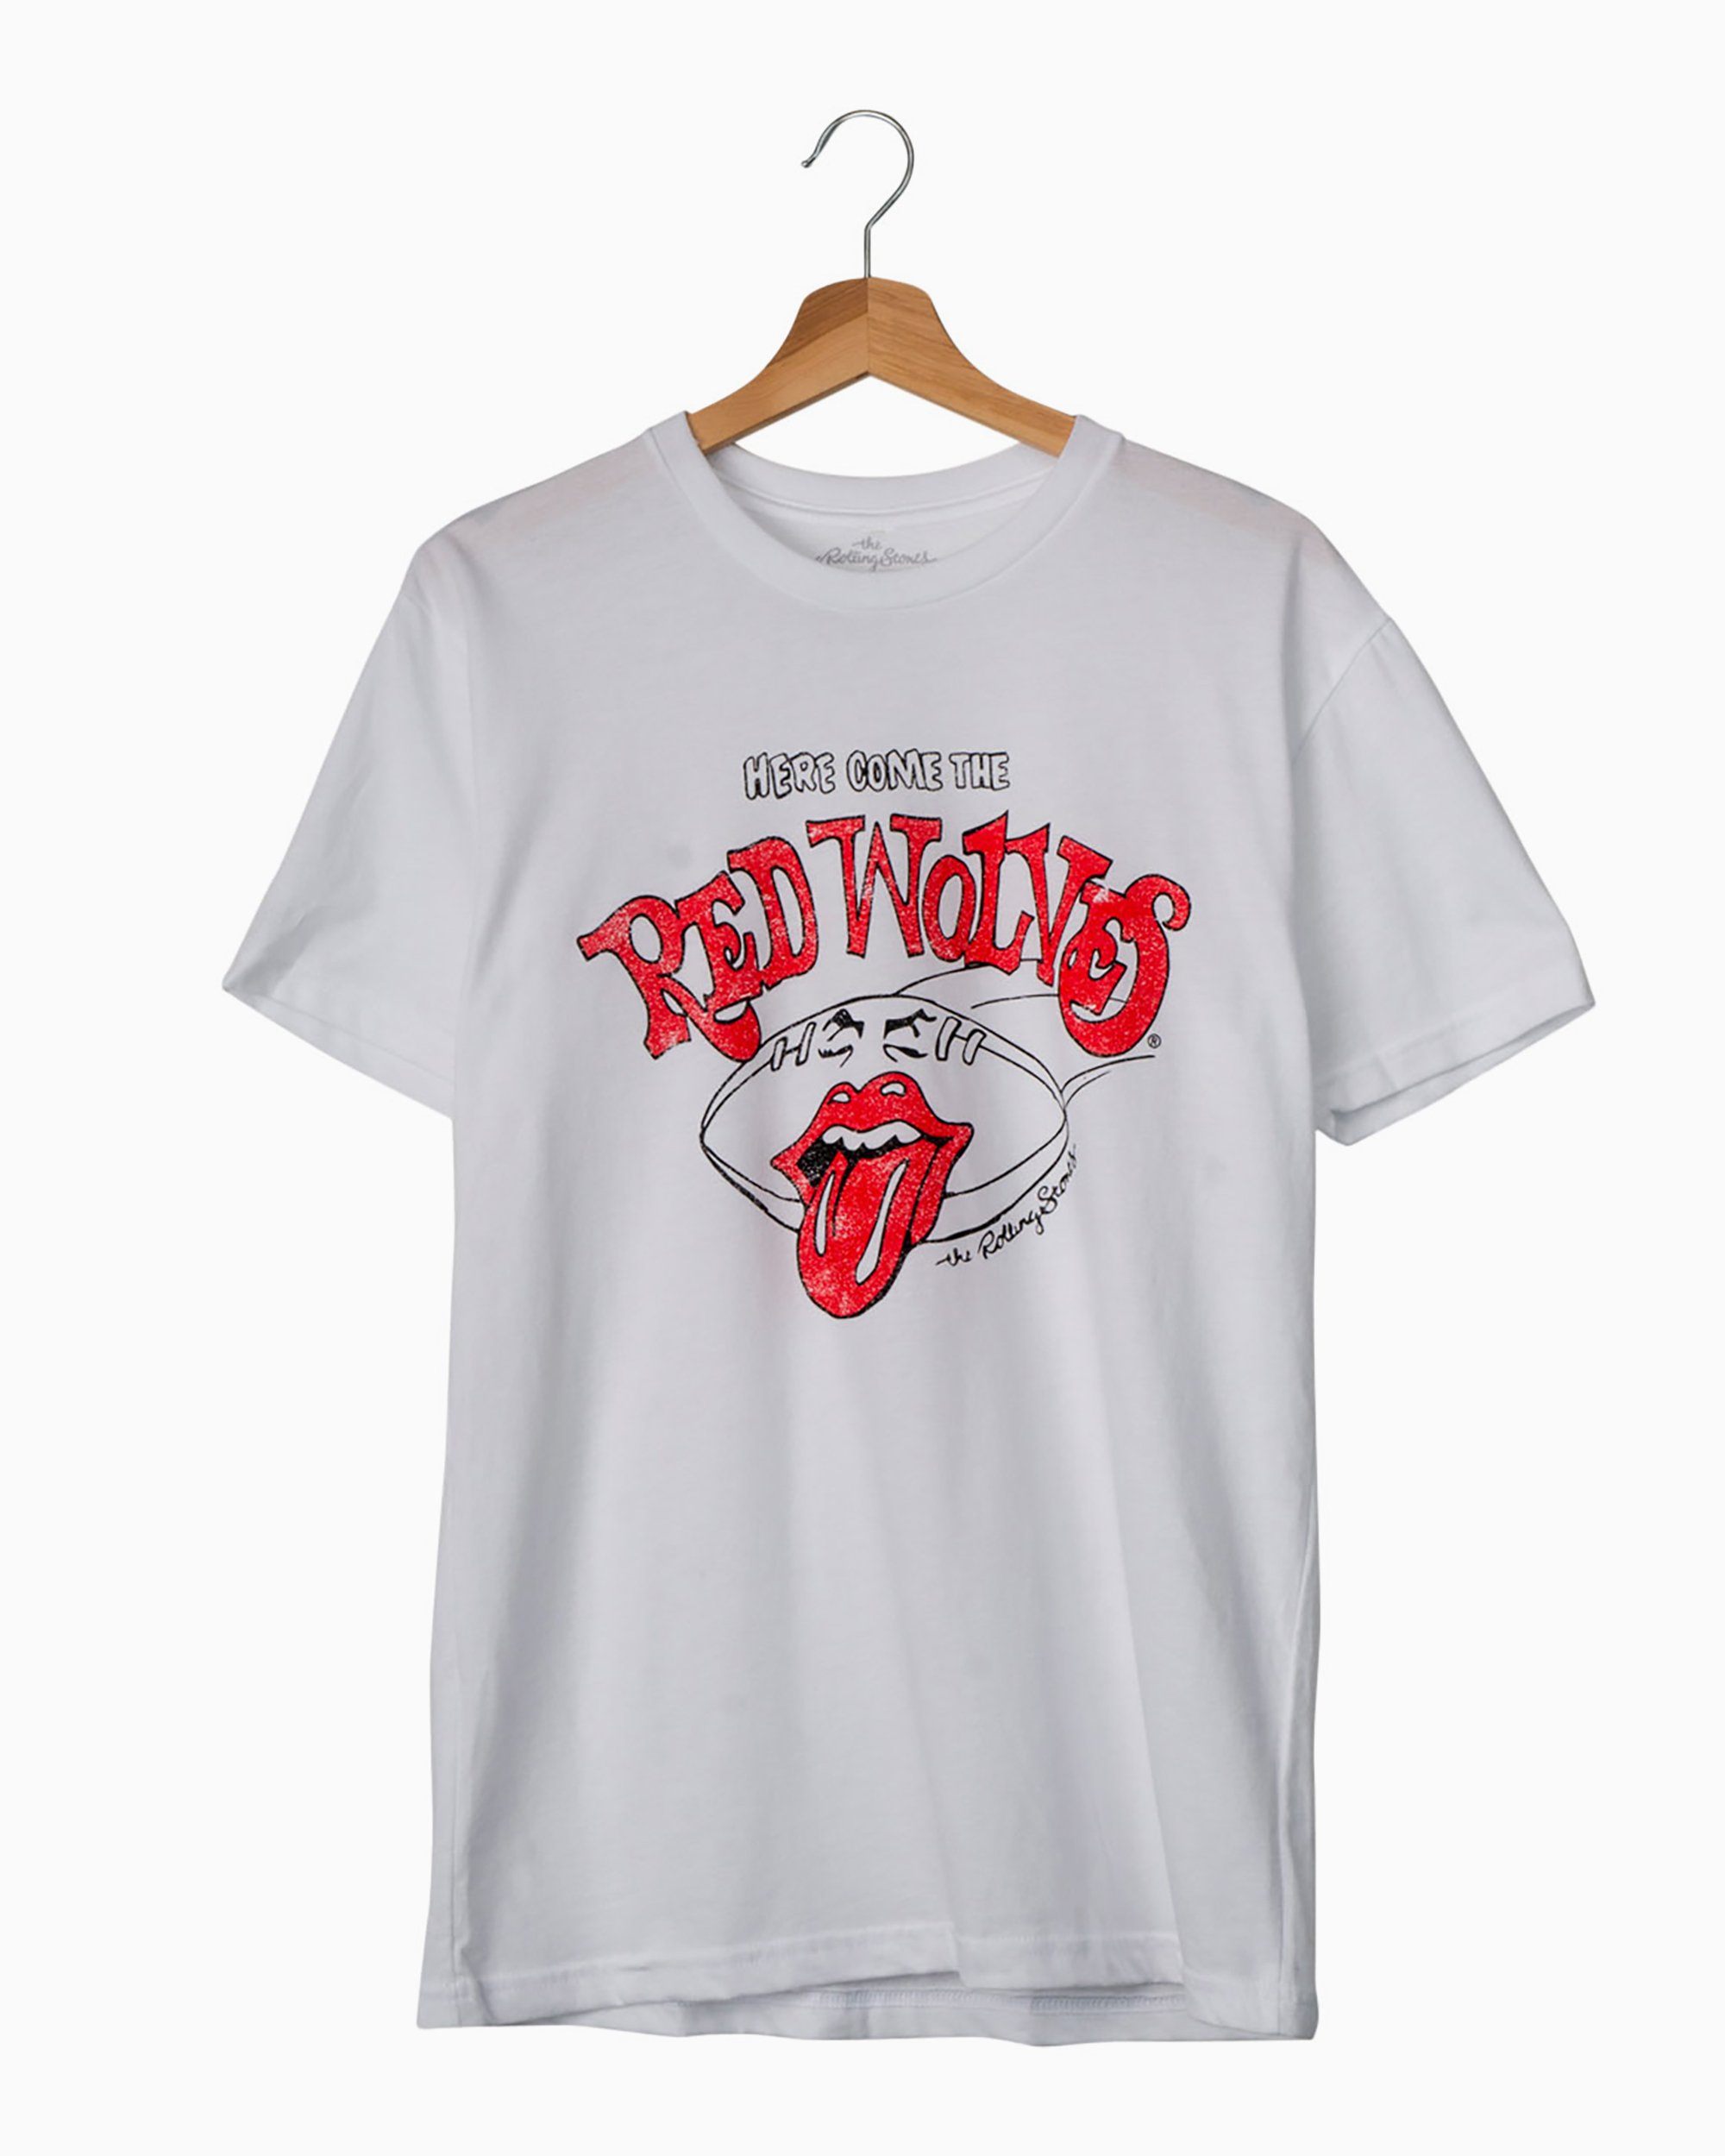 Rolling Stones Here Come The Red Wolves White Tee - shoplivylu